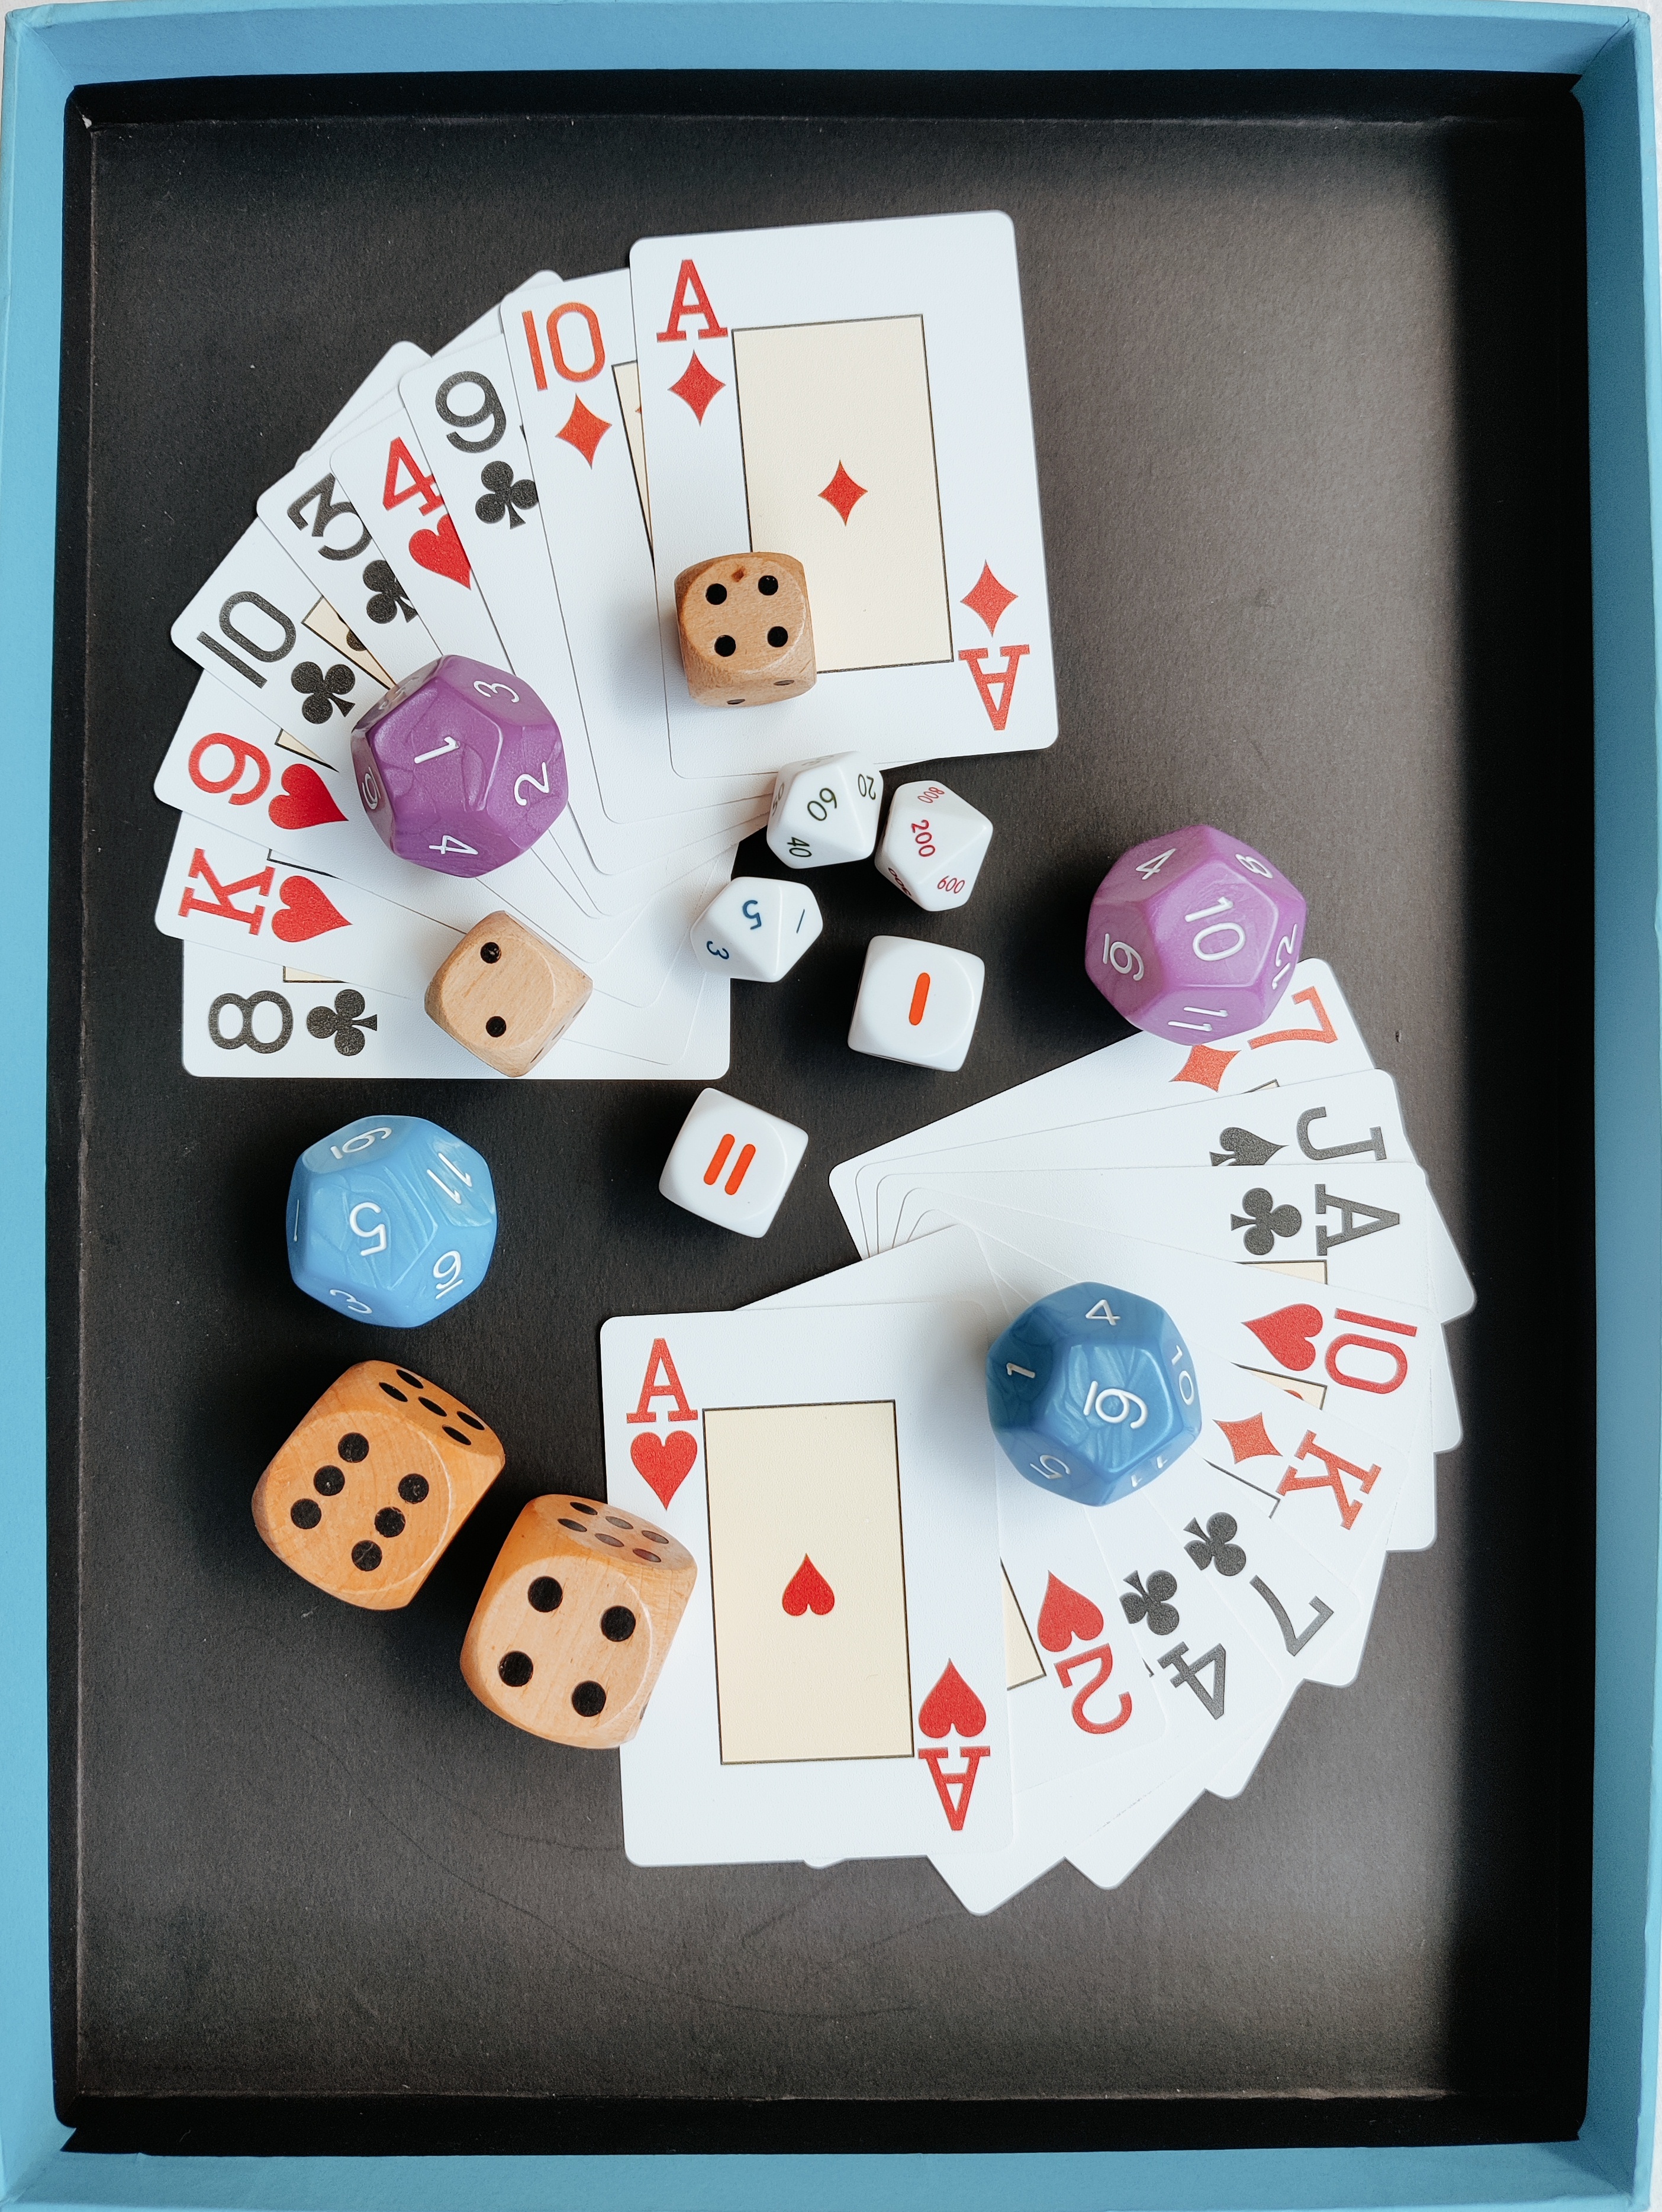 Playing cards and different types of dice laid out on a black background with a blue border